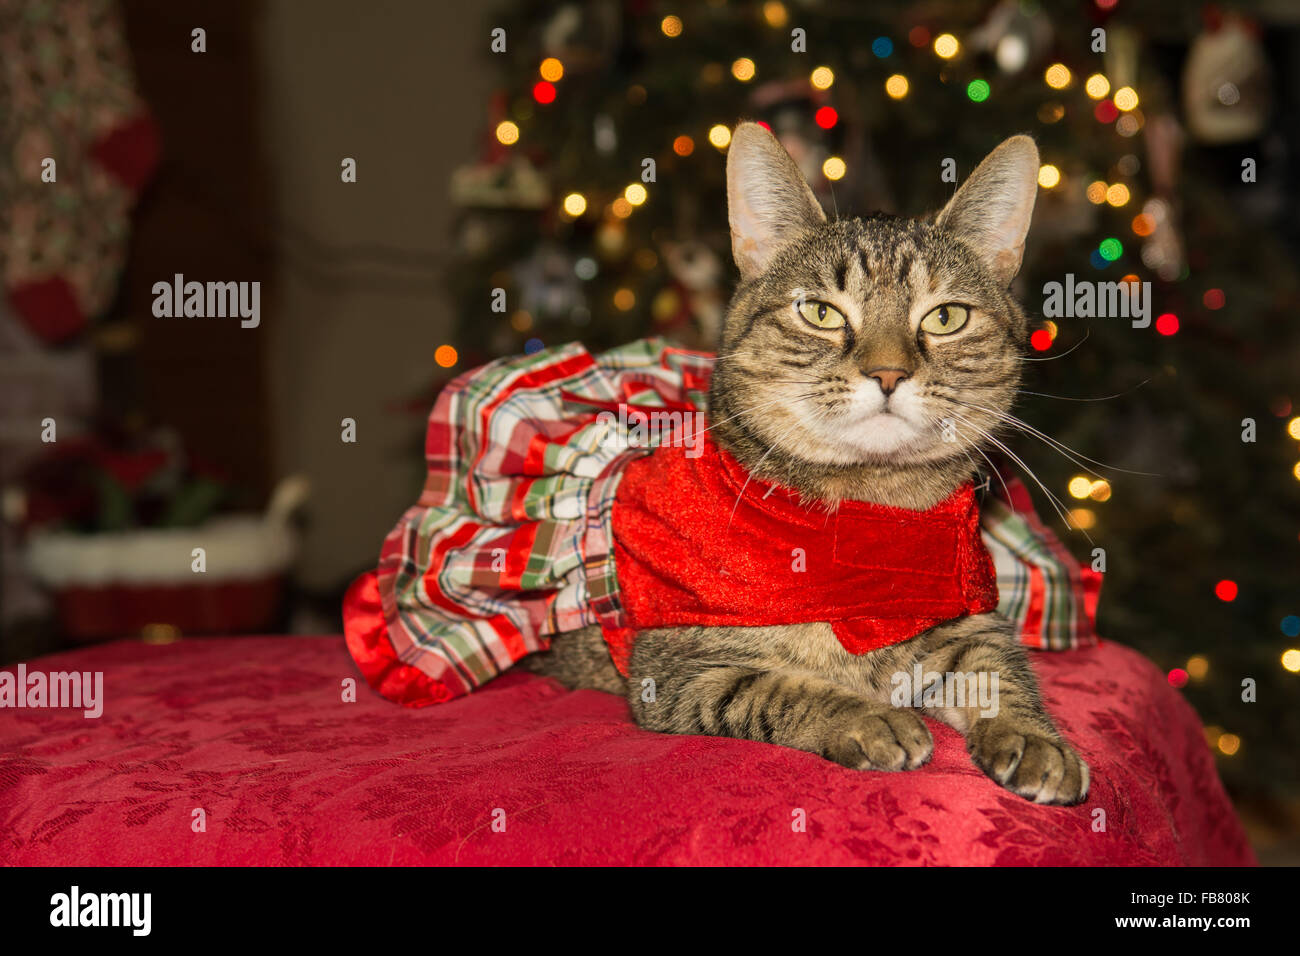 Cute cat wearing a dress on Christmas Stock Photo